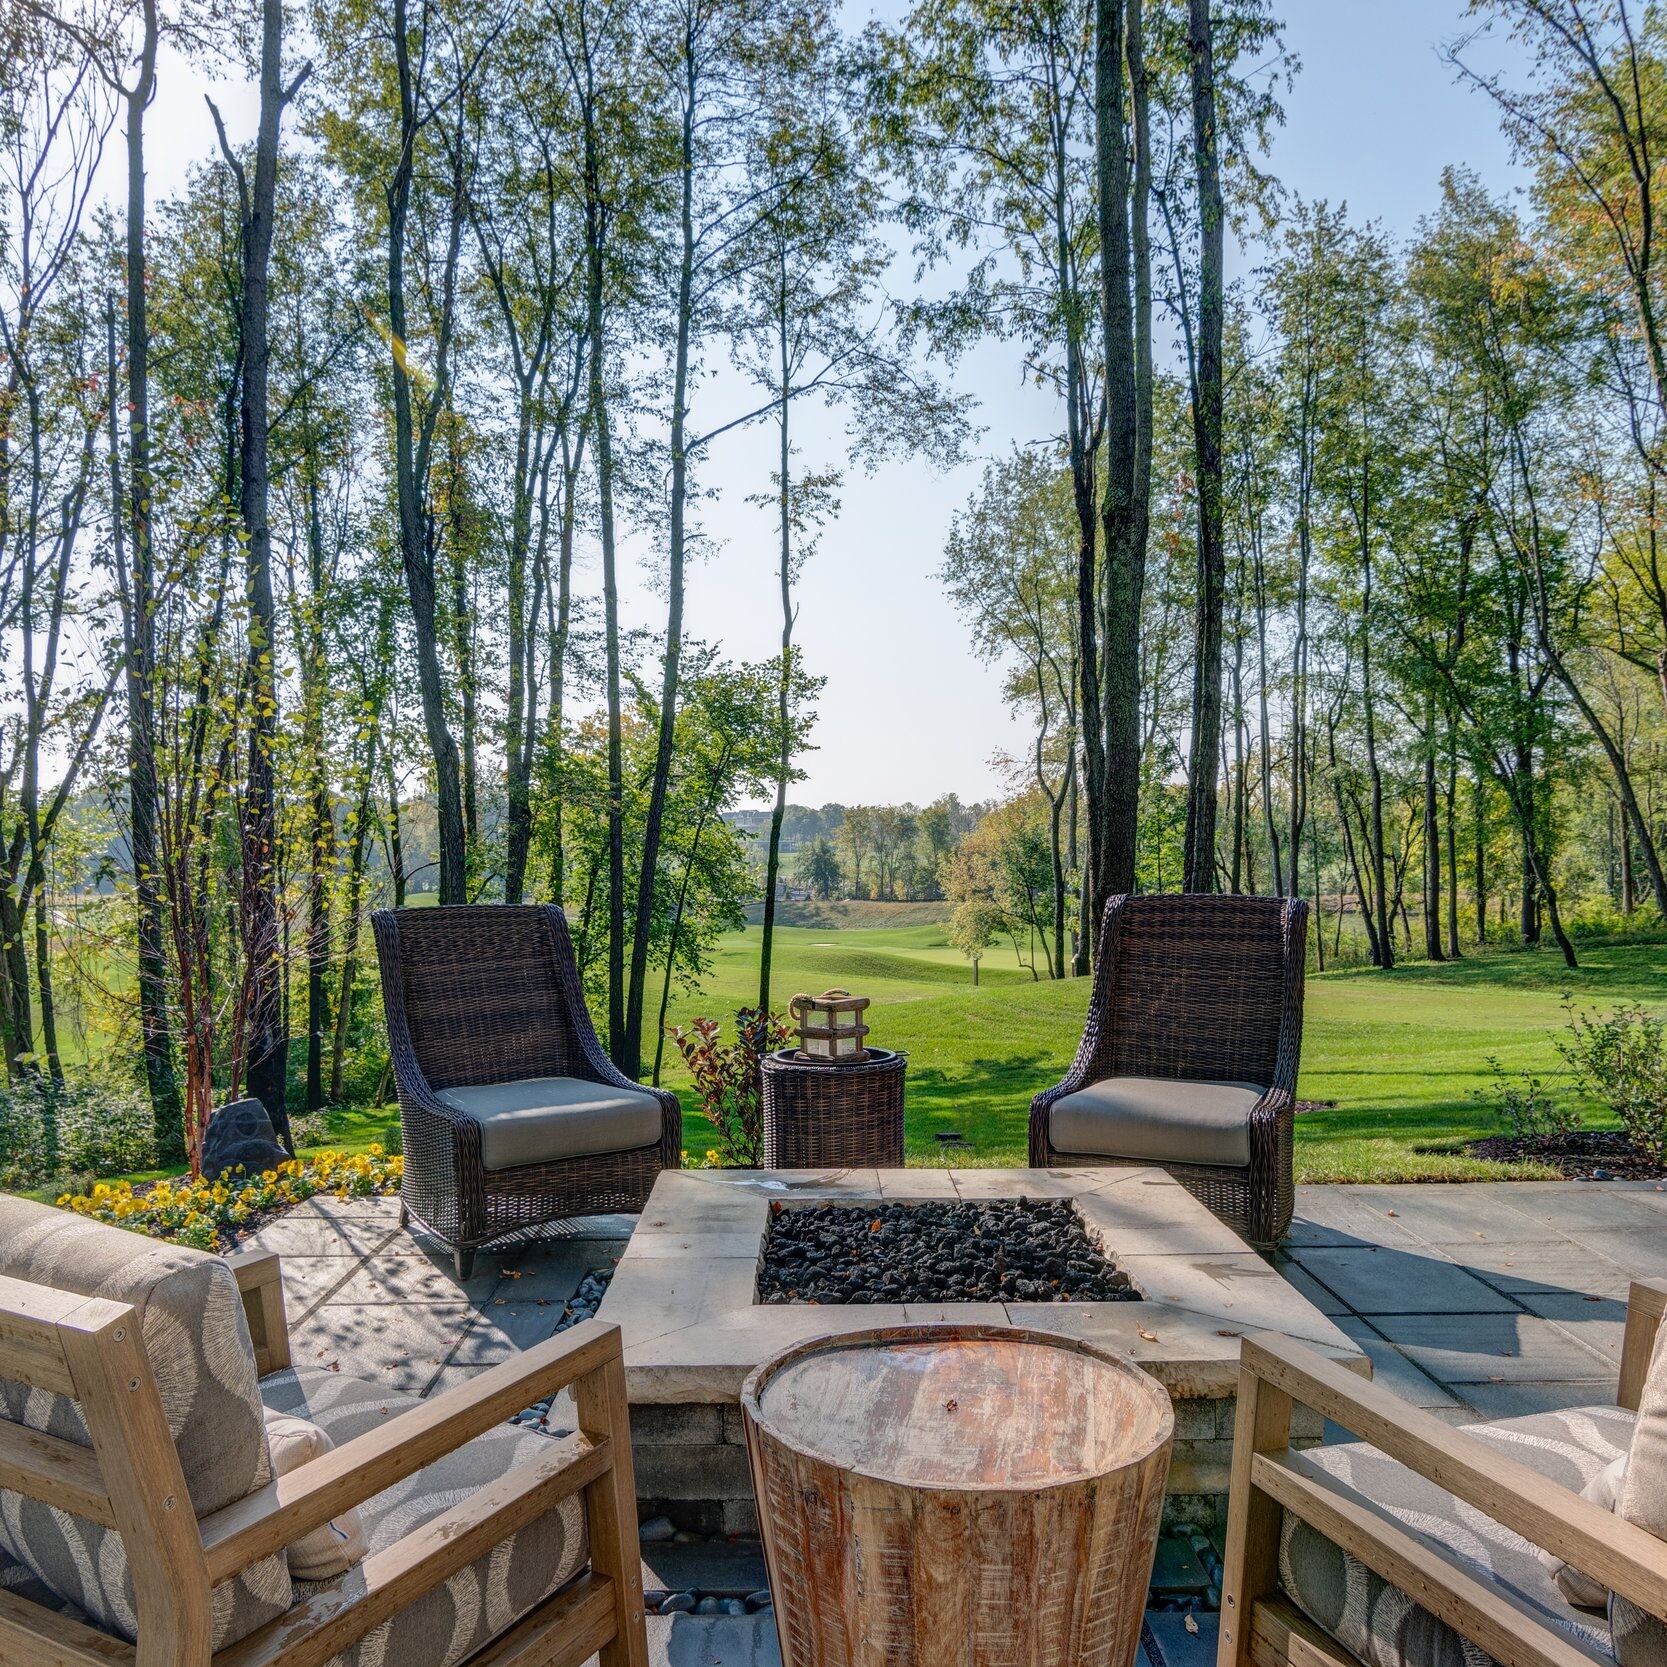 A spacious patio with a fire pit nestled in the midst of a serene wooded area.